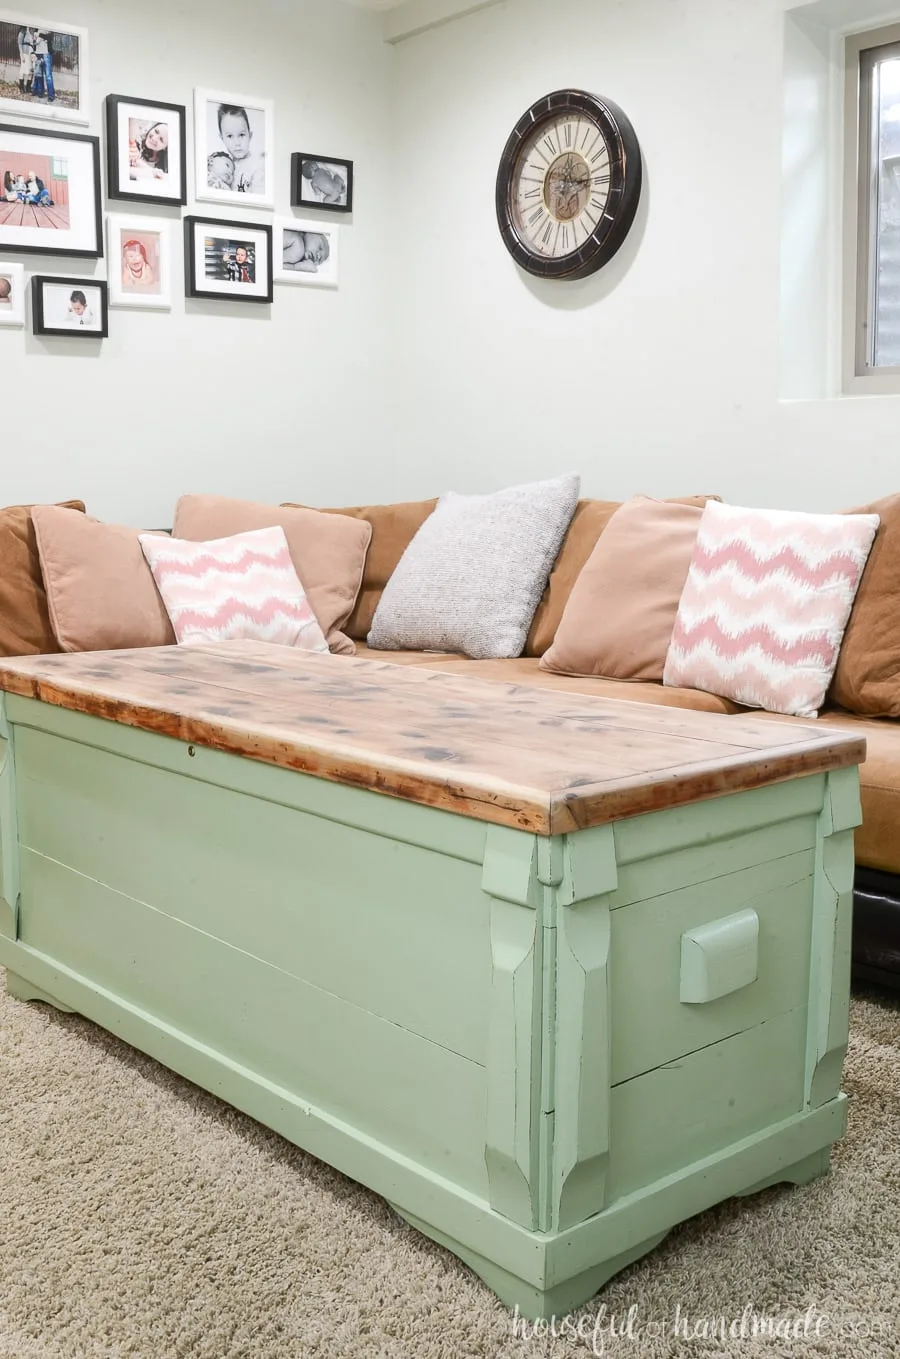 Moss green painted storage chest with raw cedar wood top as a coffee table in a living room. 